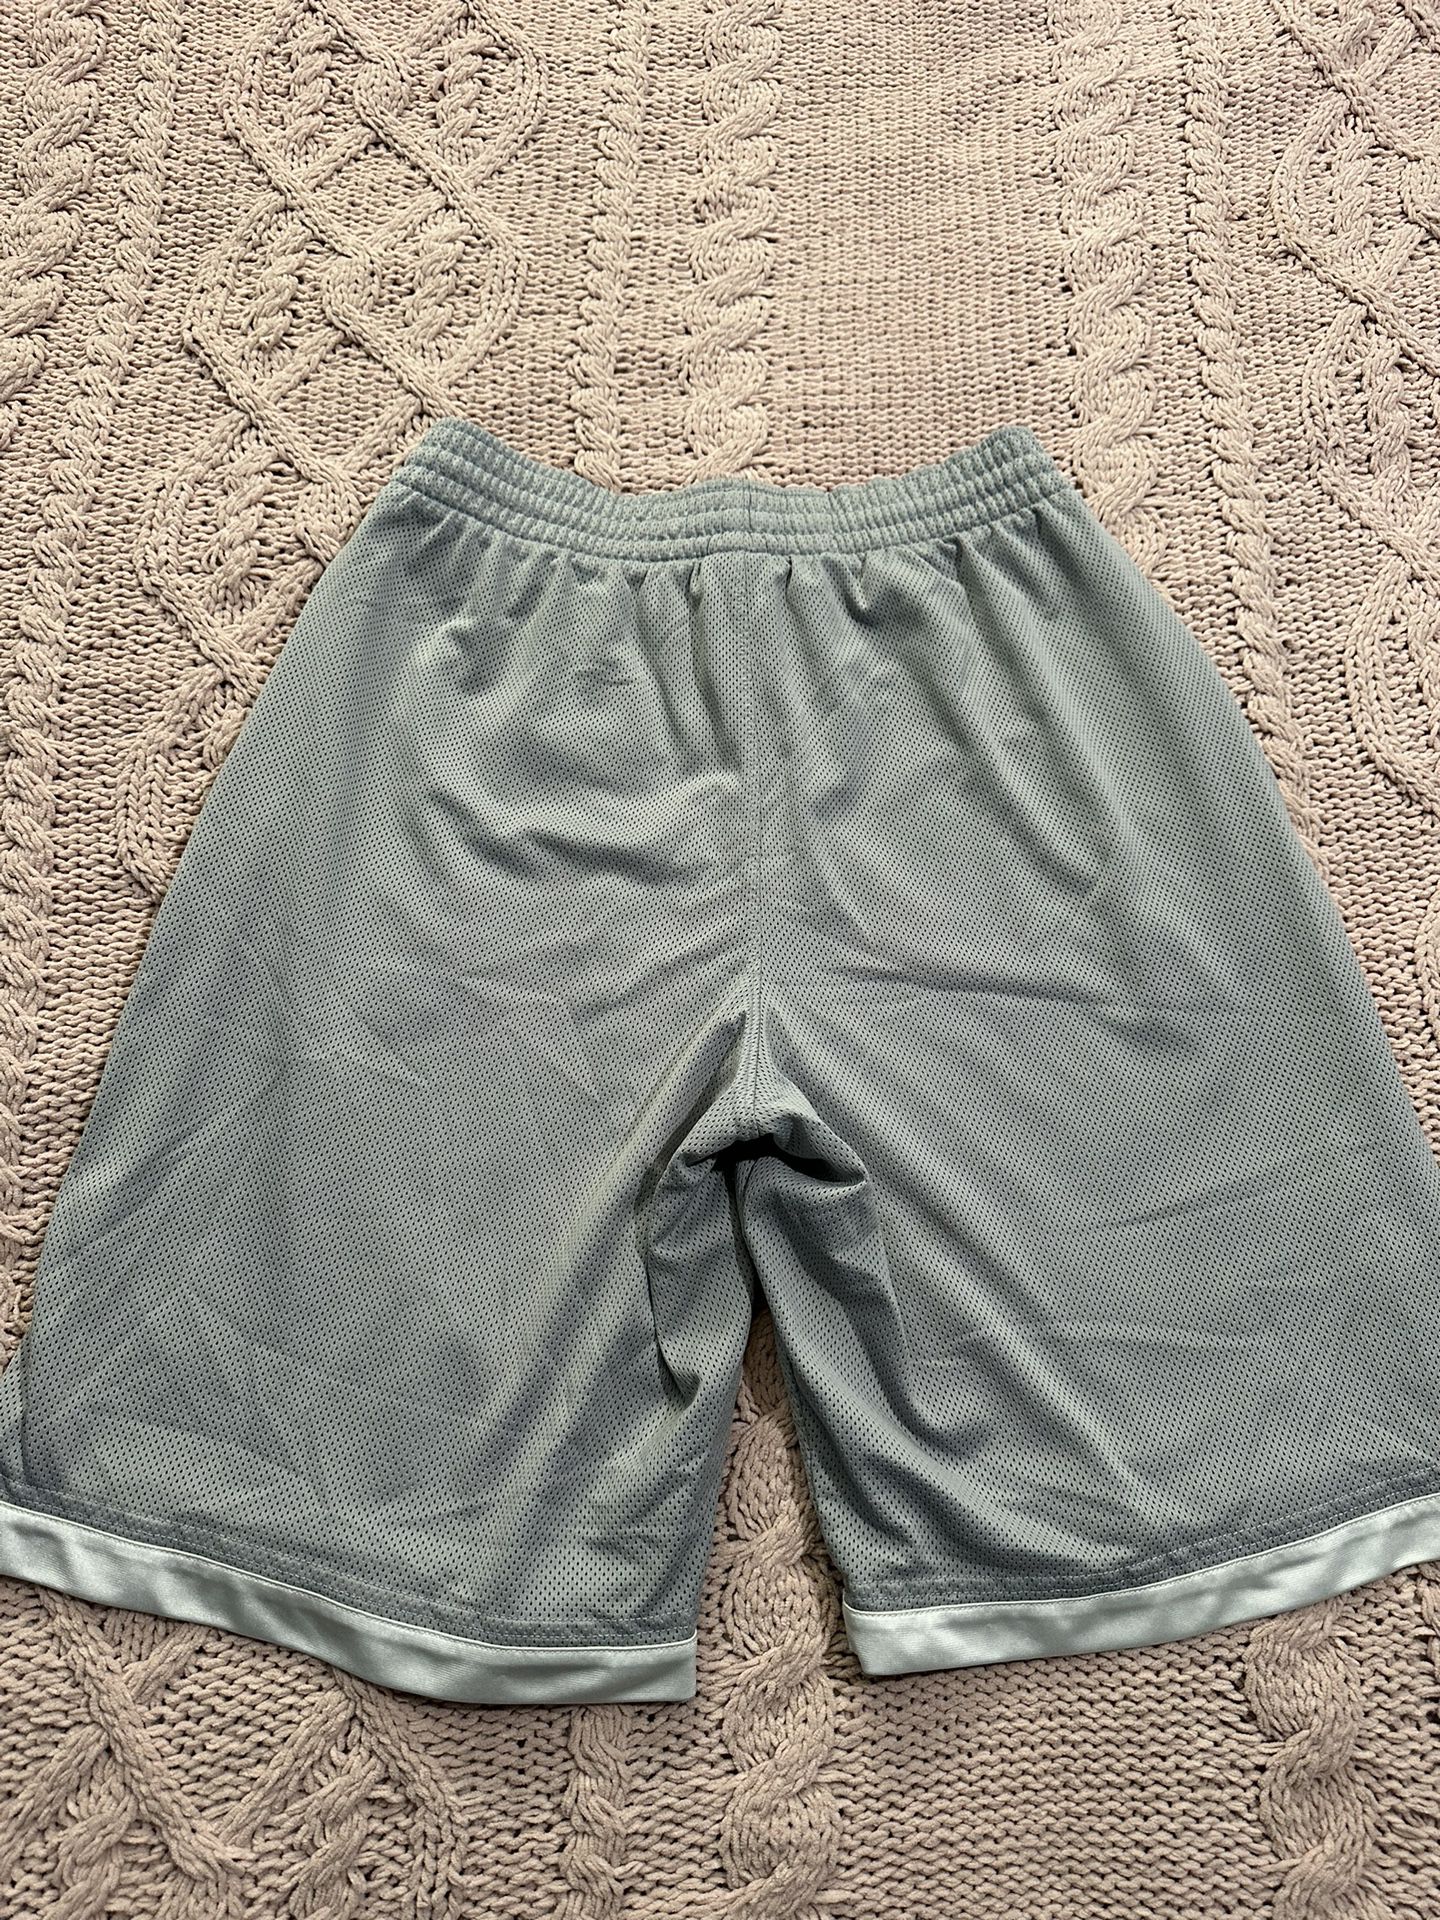 Nike Basketball Shorts for Sale in Jacinto City, TX - OfferUp